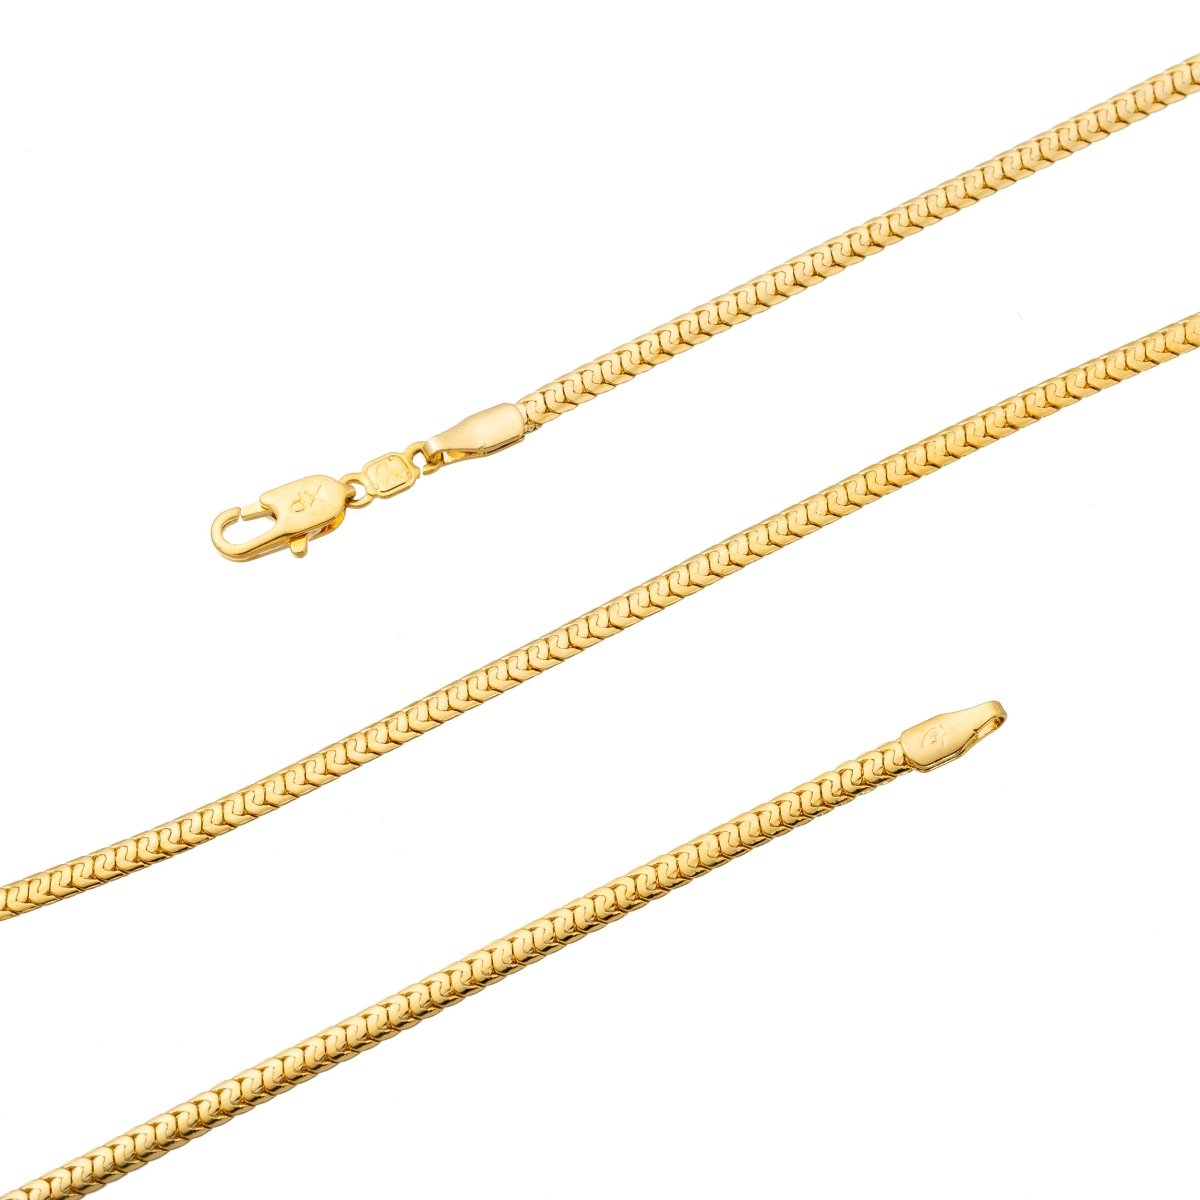 18.5 inch Snake Chain Necklace, 24K Gold Plated Snake Finished Necklace For Jewelry Making, Dainty 2.8mm Width Snake Necklace w/ Lobster Clasps | CN-254 Clearance Pricing - DLUXCA